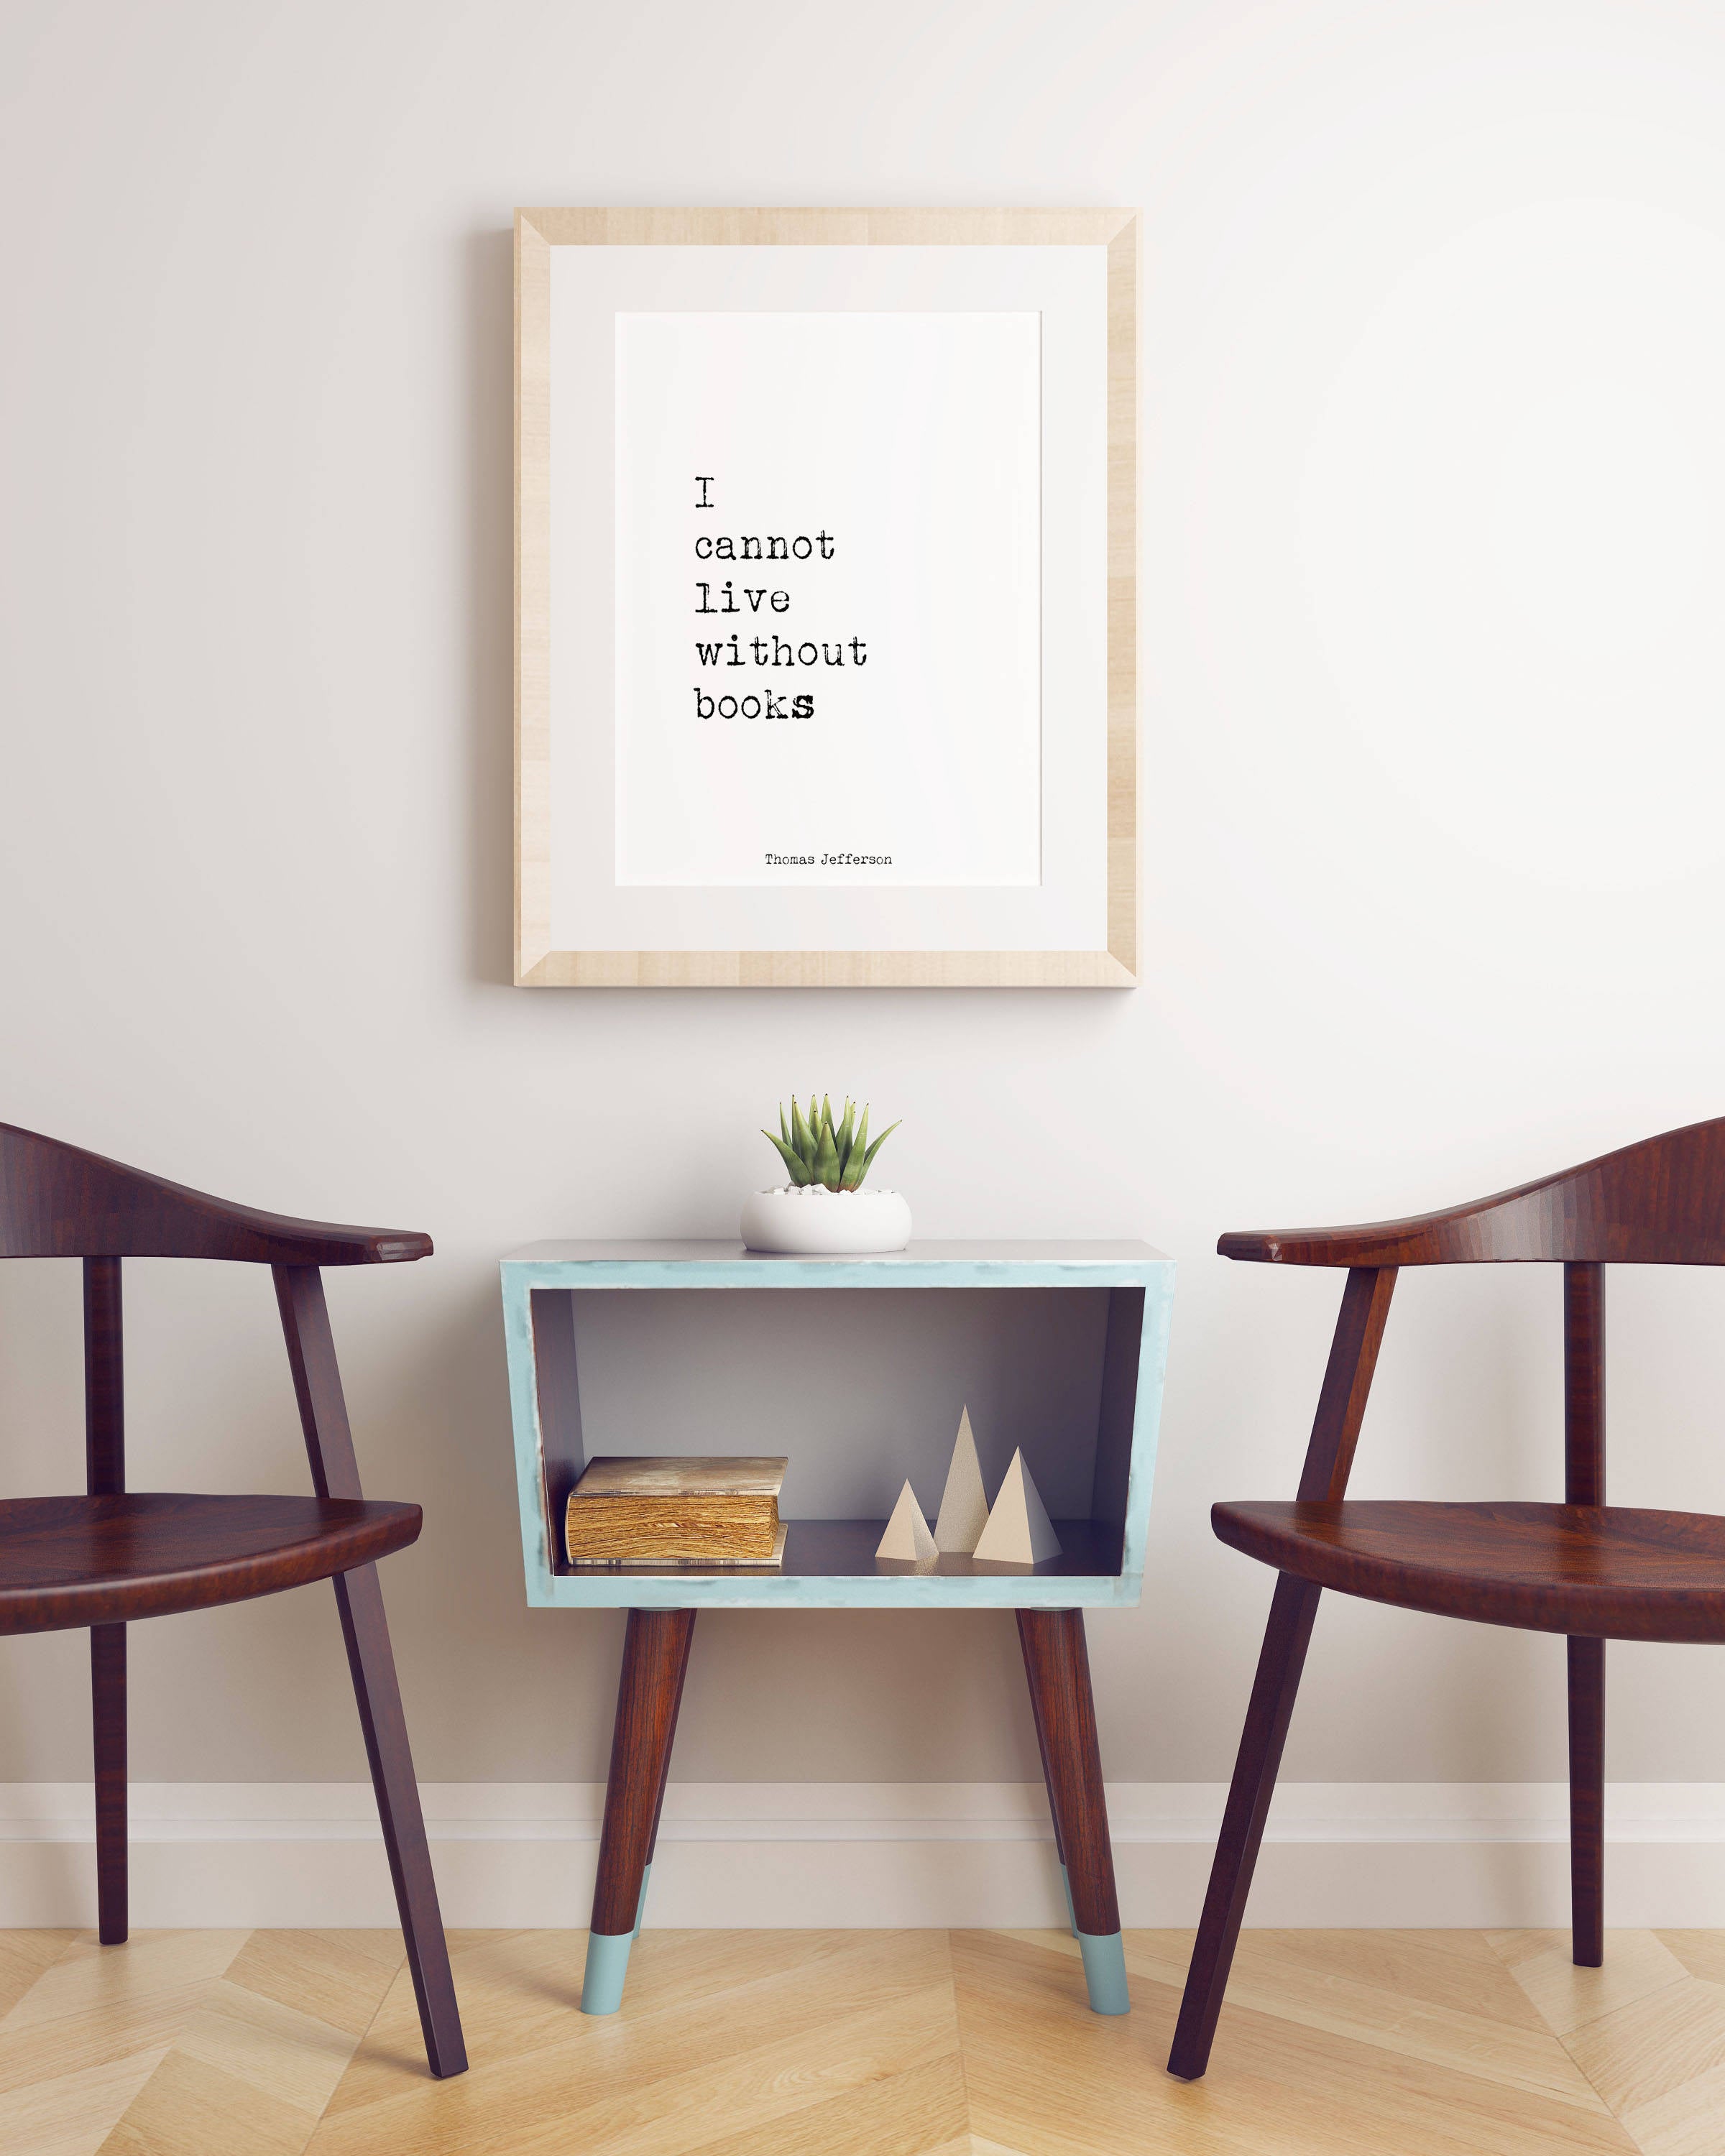 Book Reading Print with Thomas Jefferson Quote, Black & White Art For Library Decor